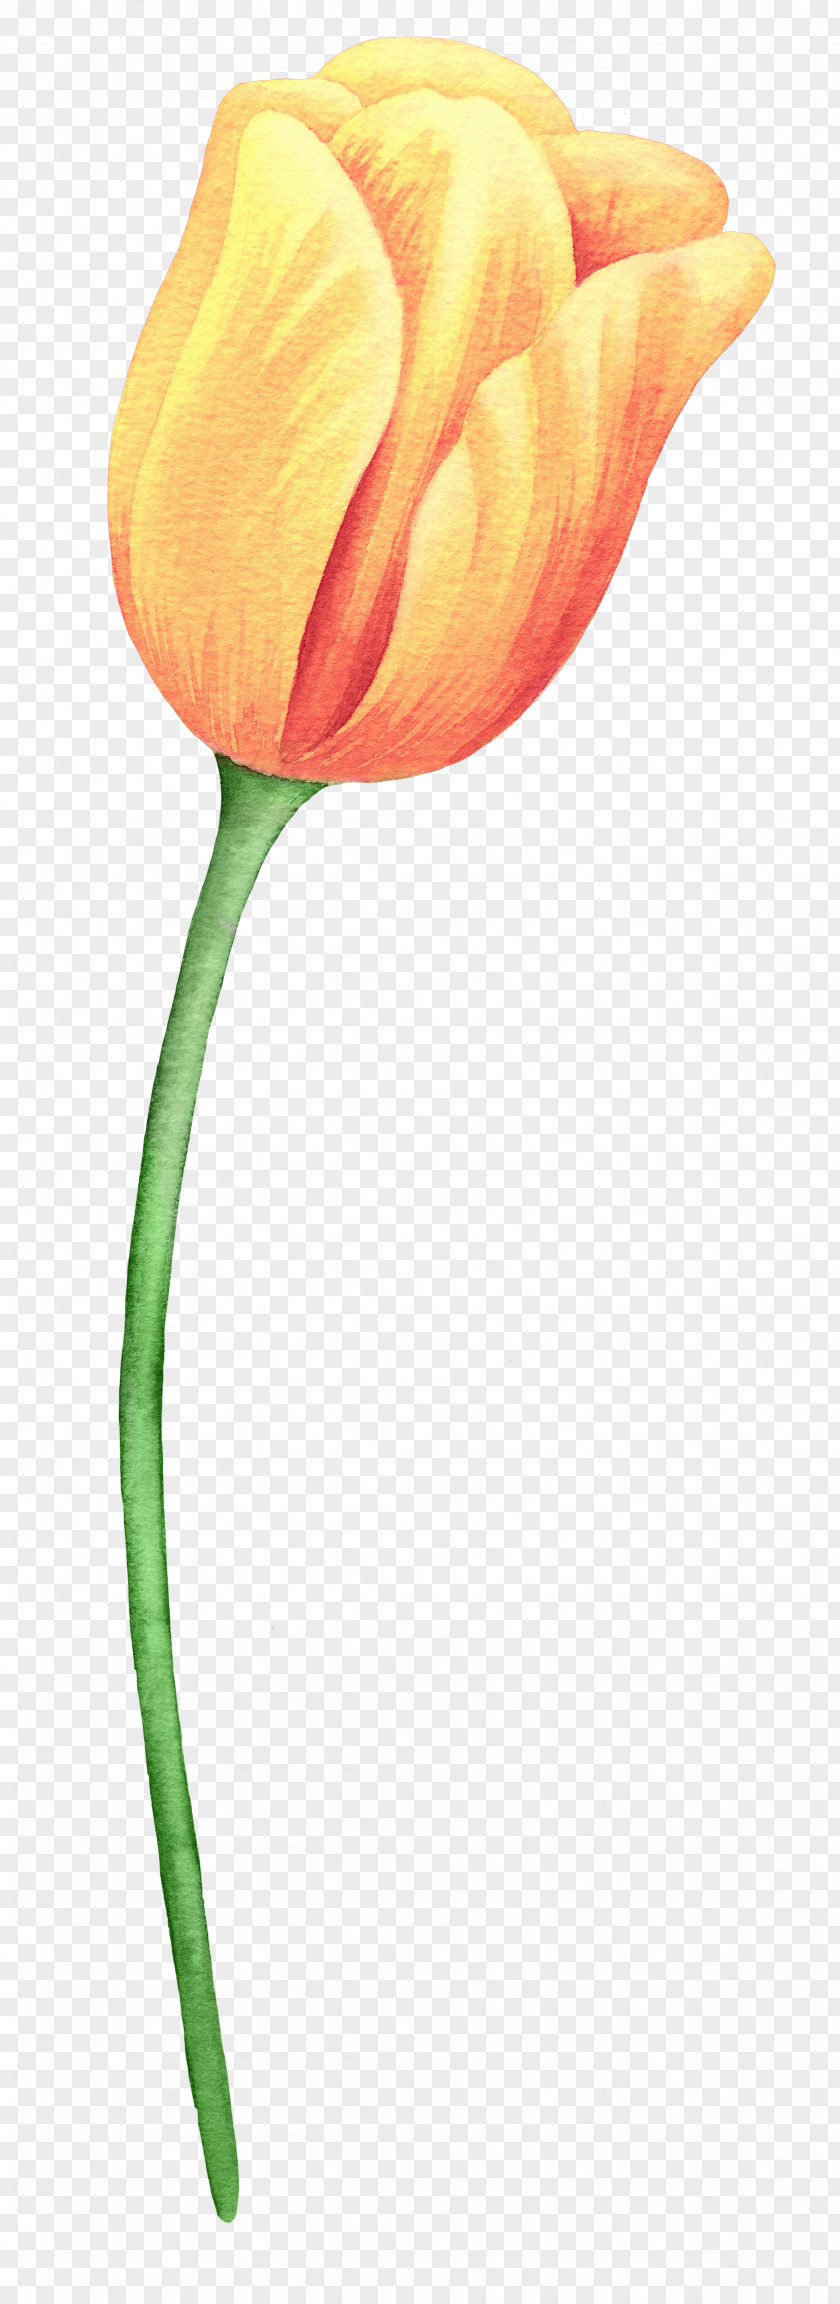 Tulip Flower Painting PNG